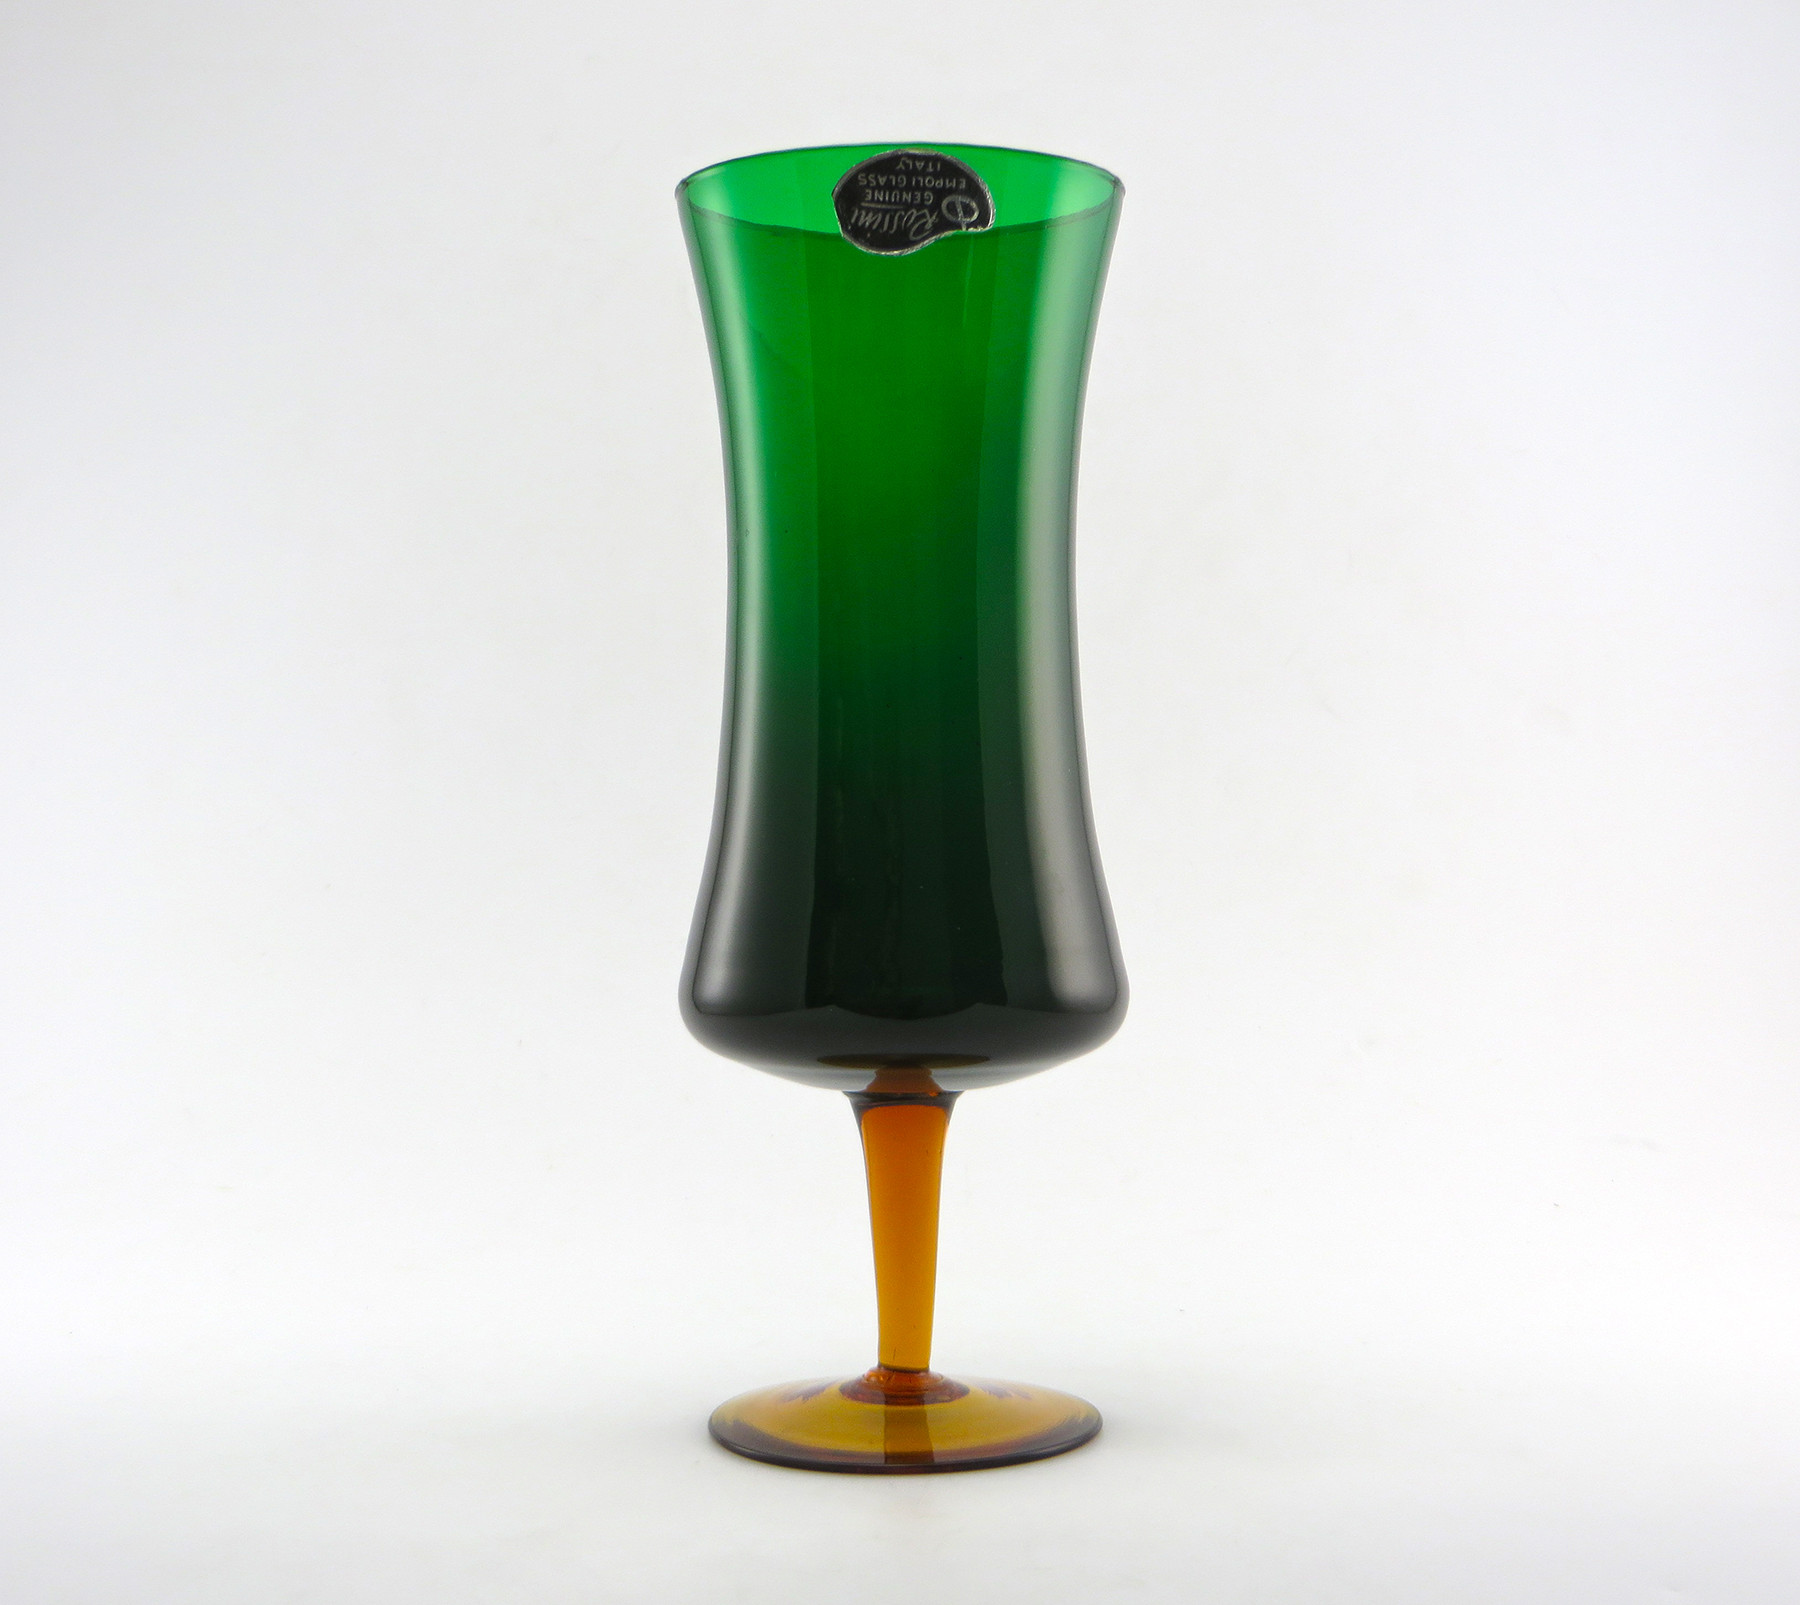 23 Awesome Green Glass Vases for Sale 2024 free download green glass vases for sale of rossini empoli art glass retro modern vase with label retro art glass with plenty of room for the stem ends at the bottom and for flowers at the top